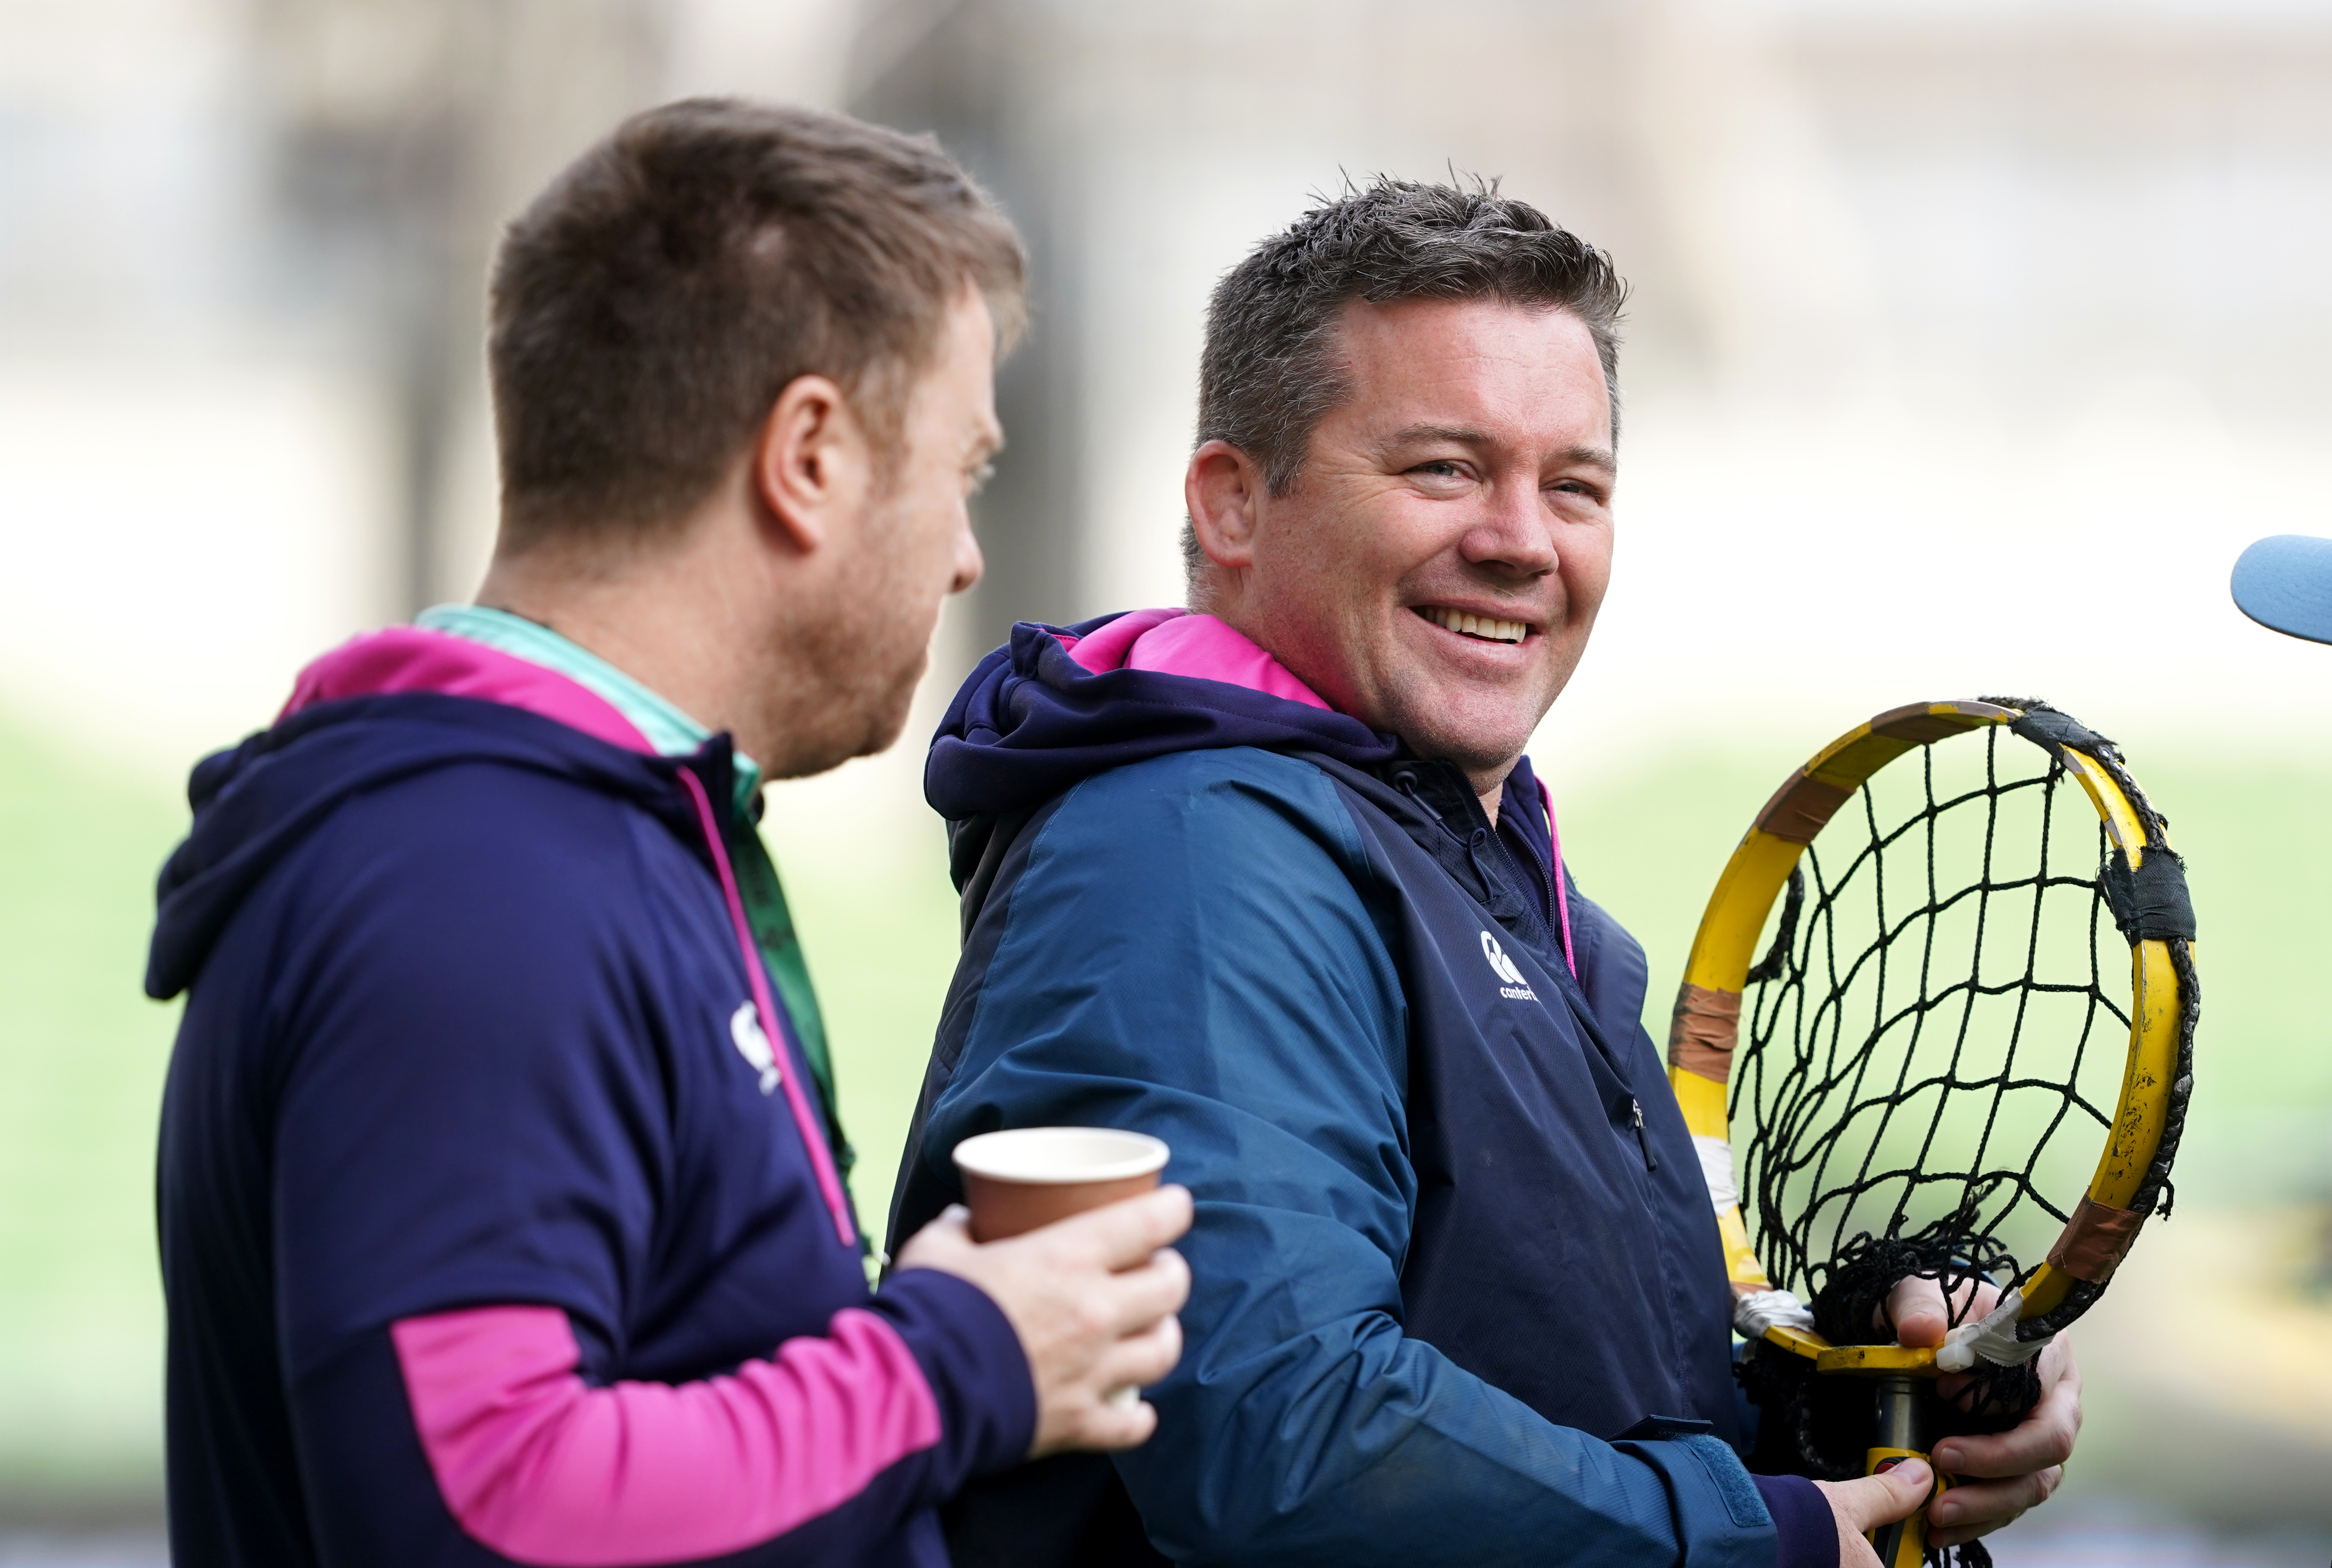 Scrum coach John Fogarty, right, was upbeat about the injury situation in Ireland's camp